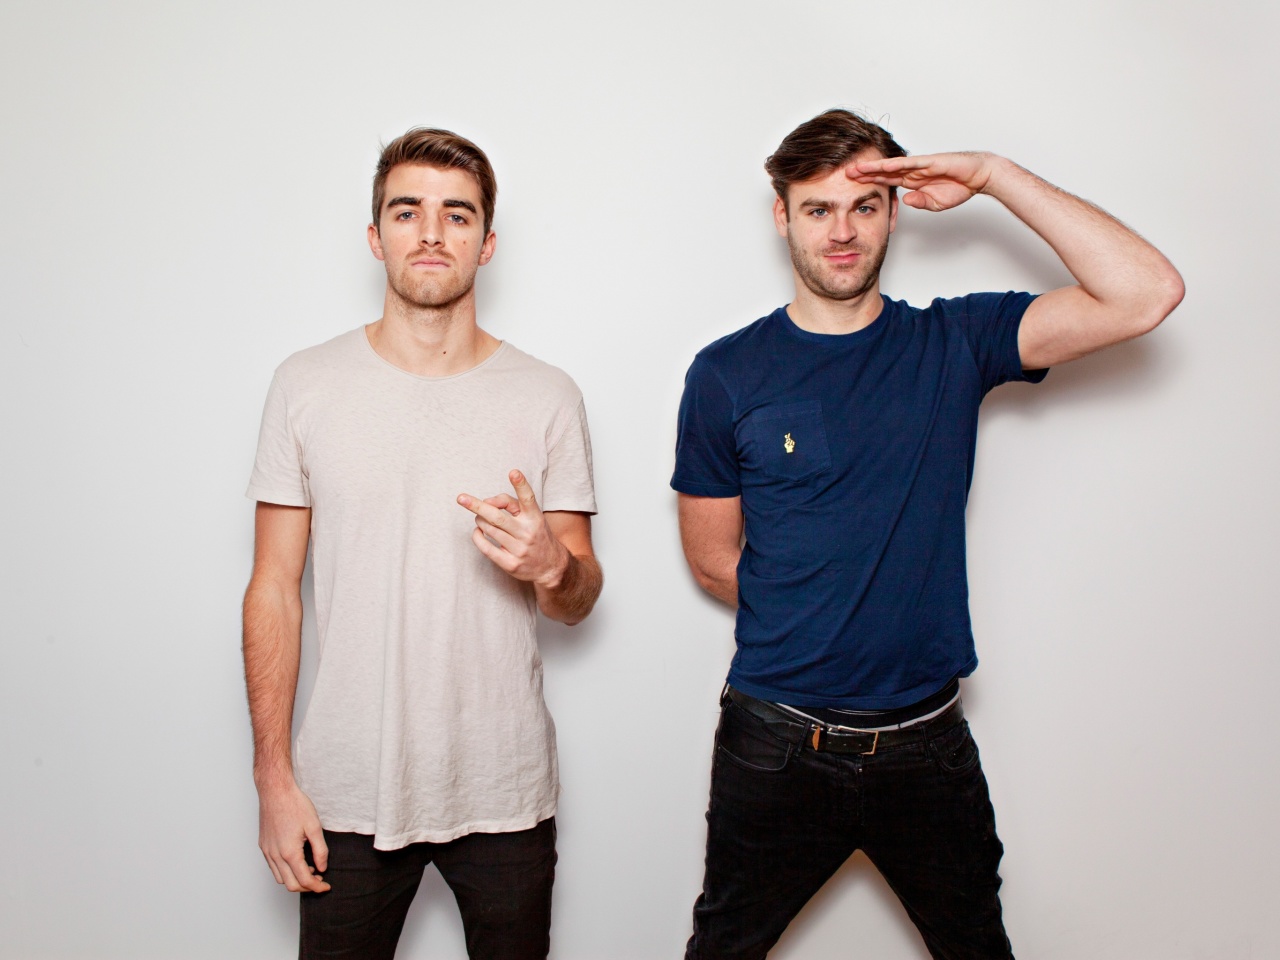 The Chainsmokers with Andrew Taggart and Alex Pall wallpaper 1280x960